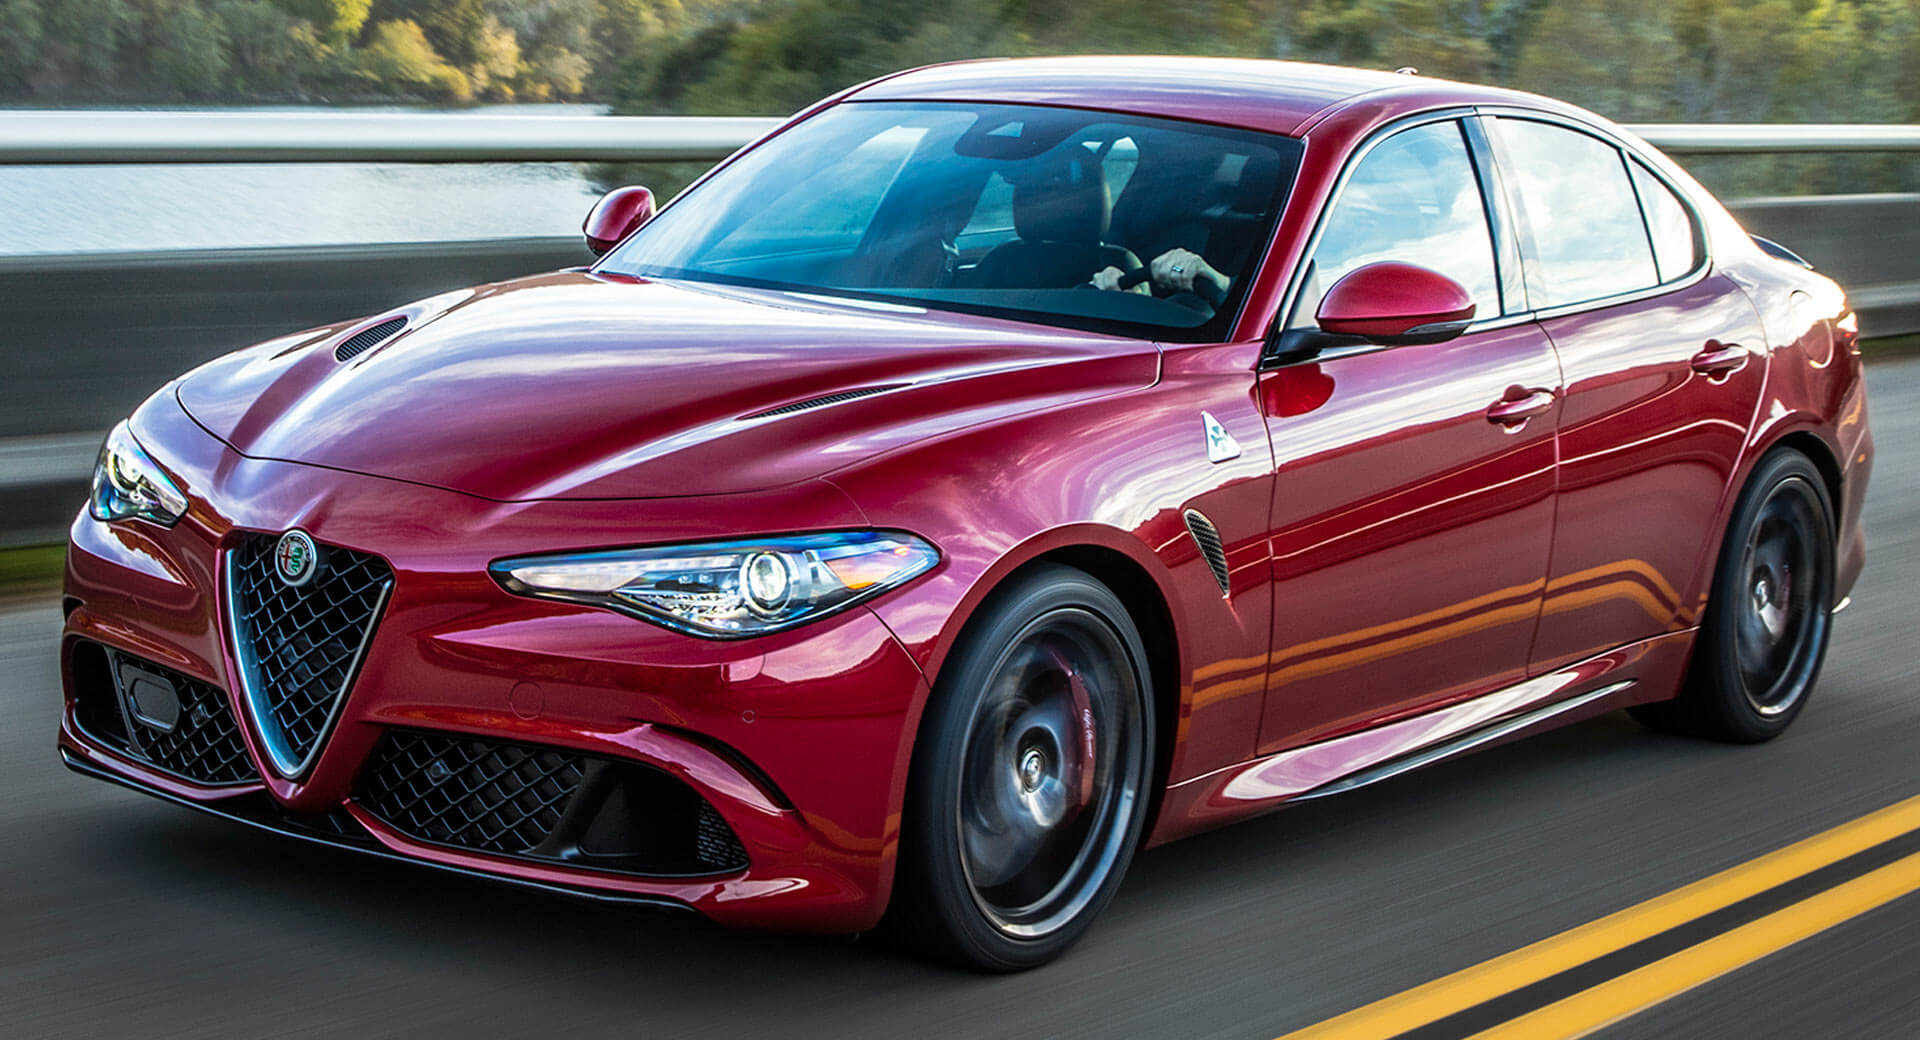 2019 Alfa Romeo Giulia Gains New Styling Packages, Additional Equipment |  Carscoops